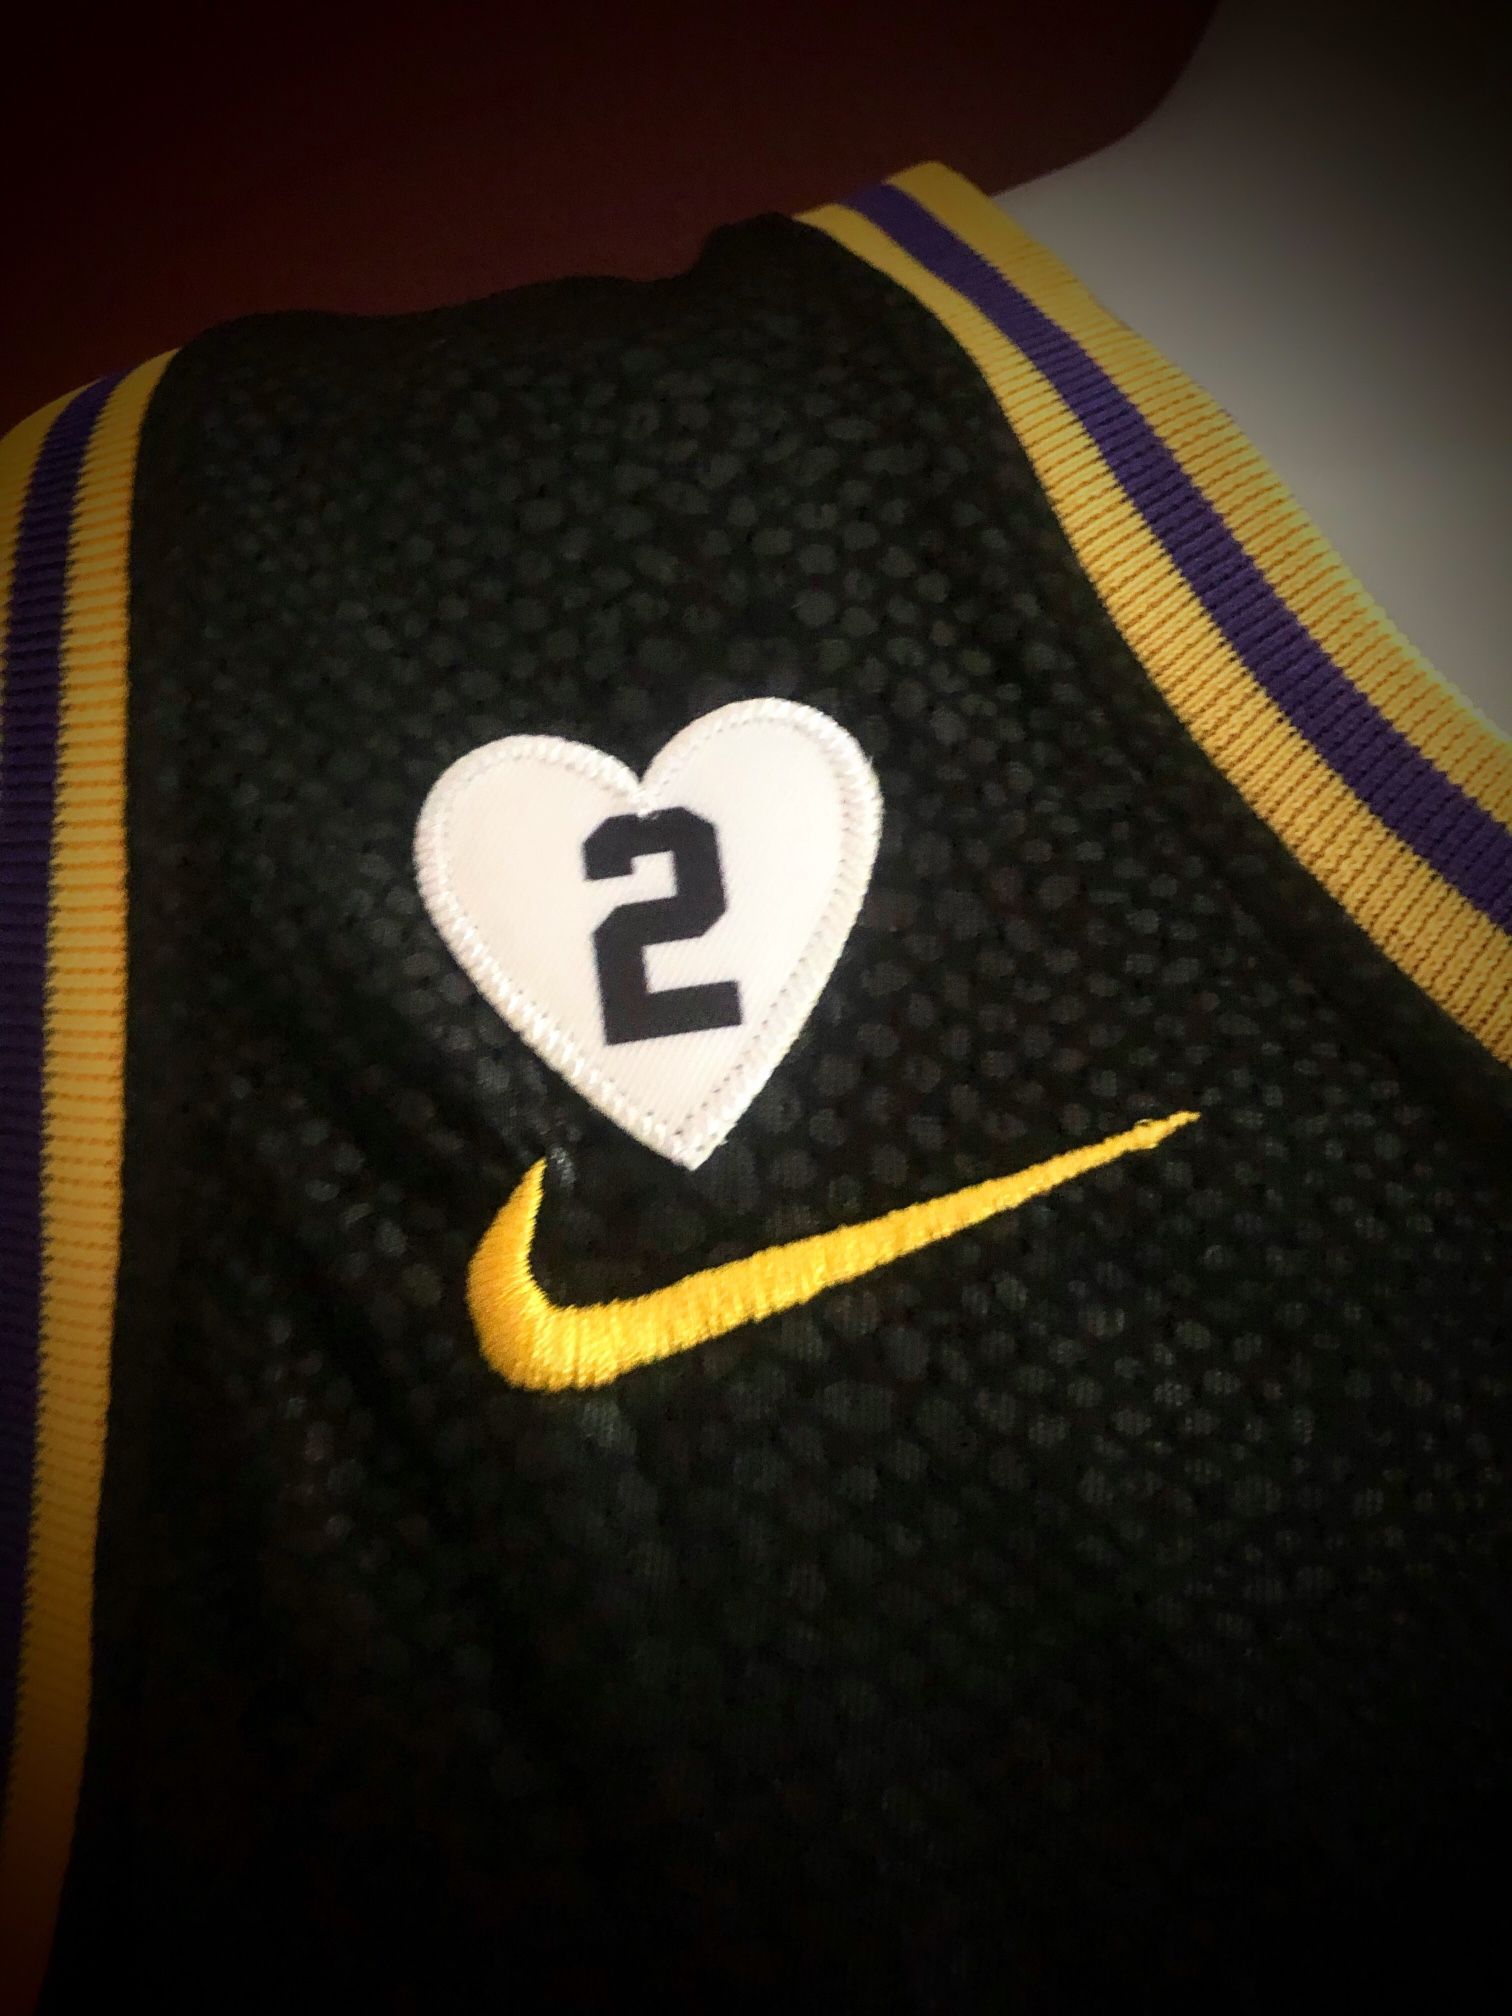 Kobe Bryant x Crenshaw Jersey Size Large. Brand New Tag Attached